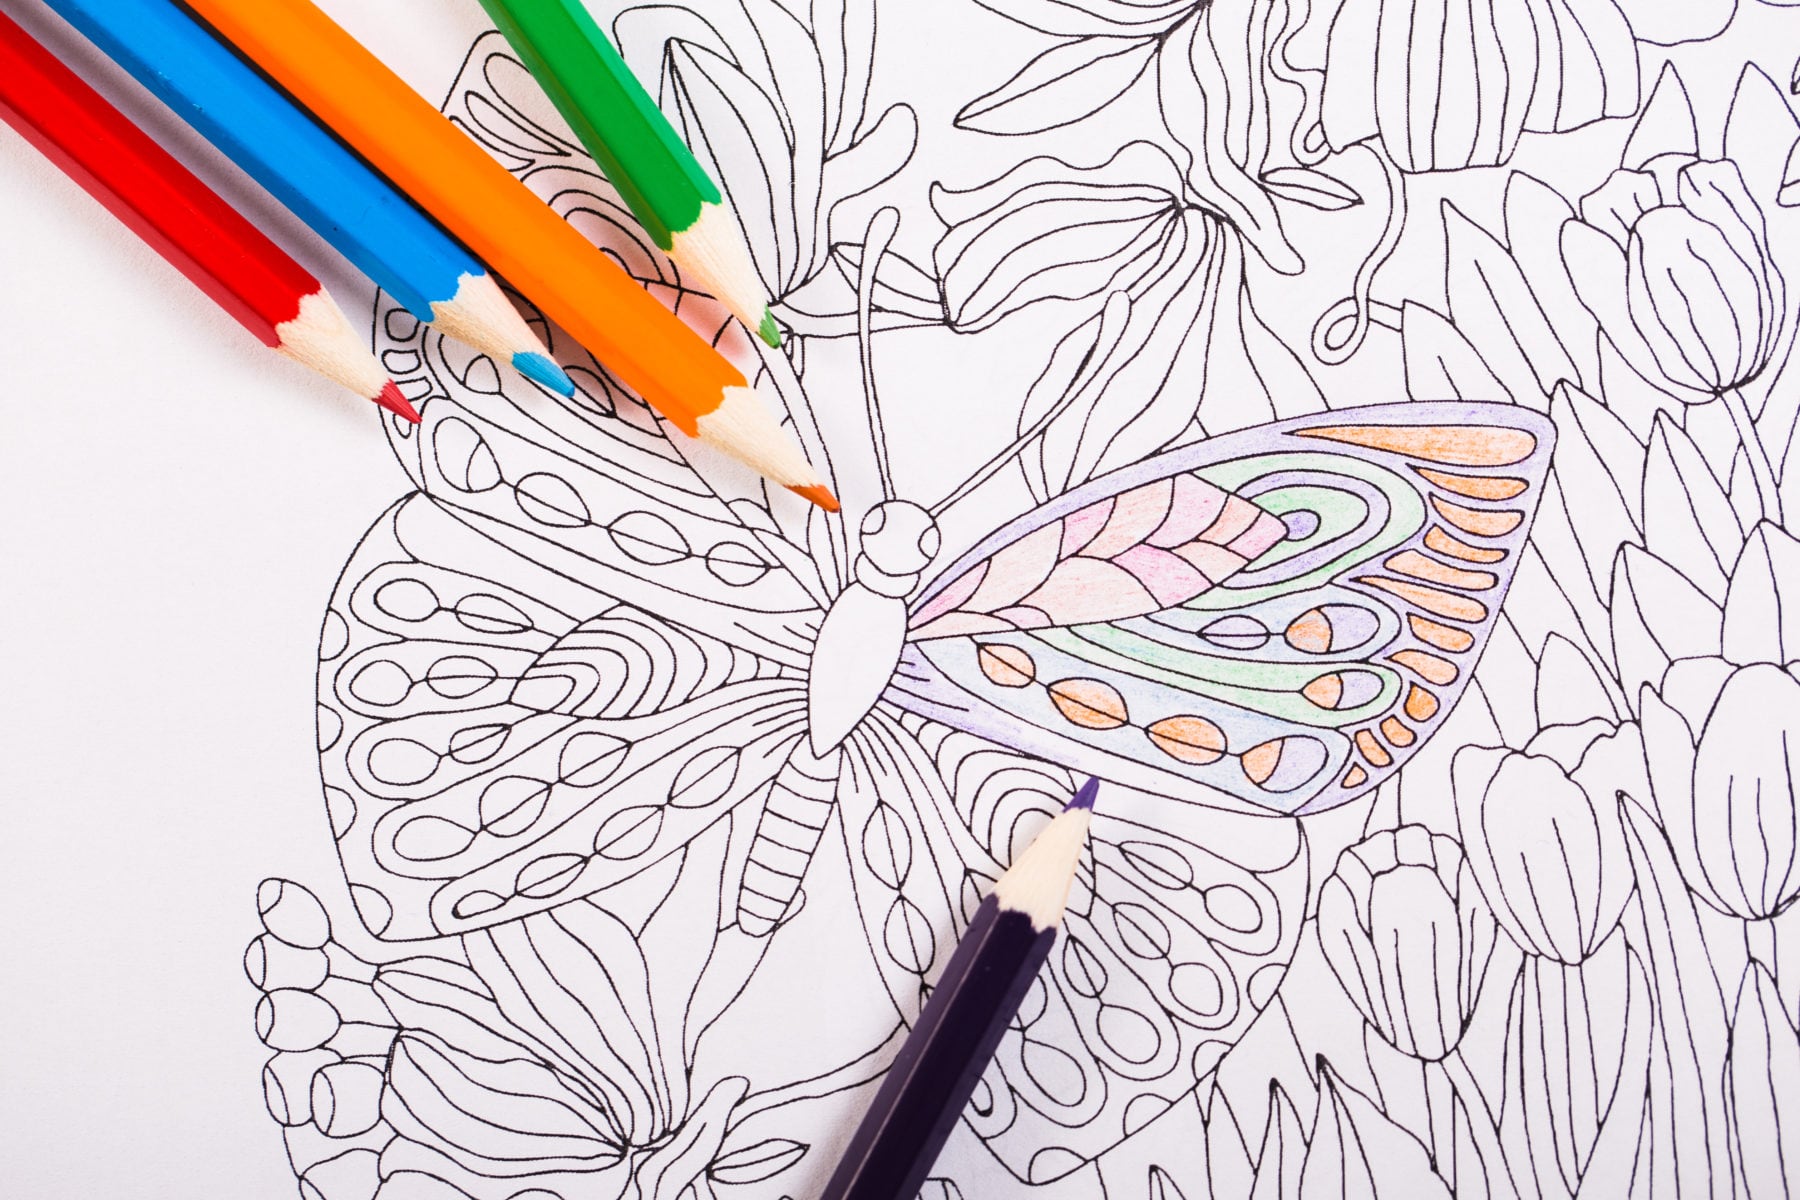 Colouring-in - Shutterstock